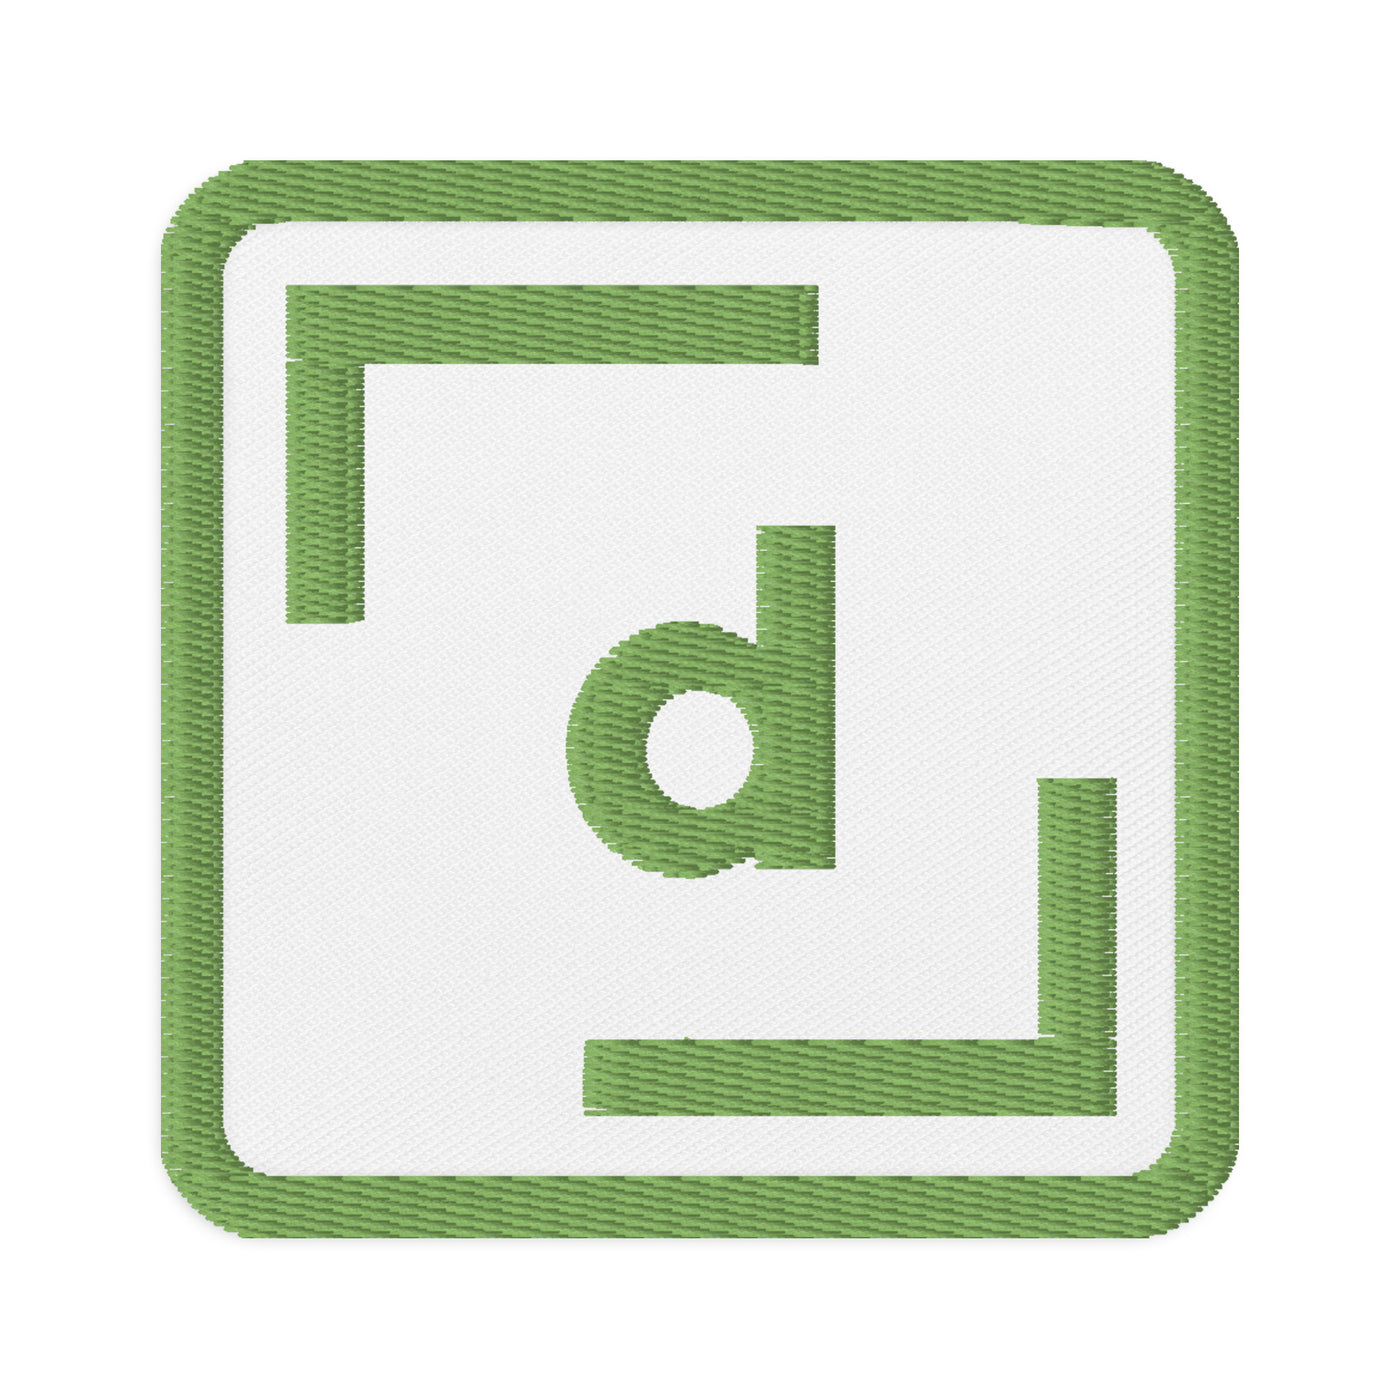 D’ Embroidered Square Patch - Green Logo